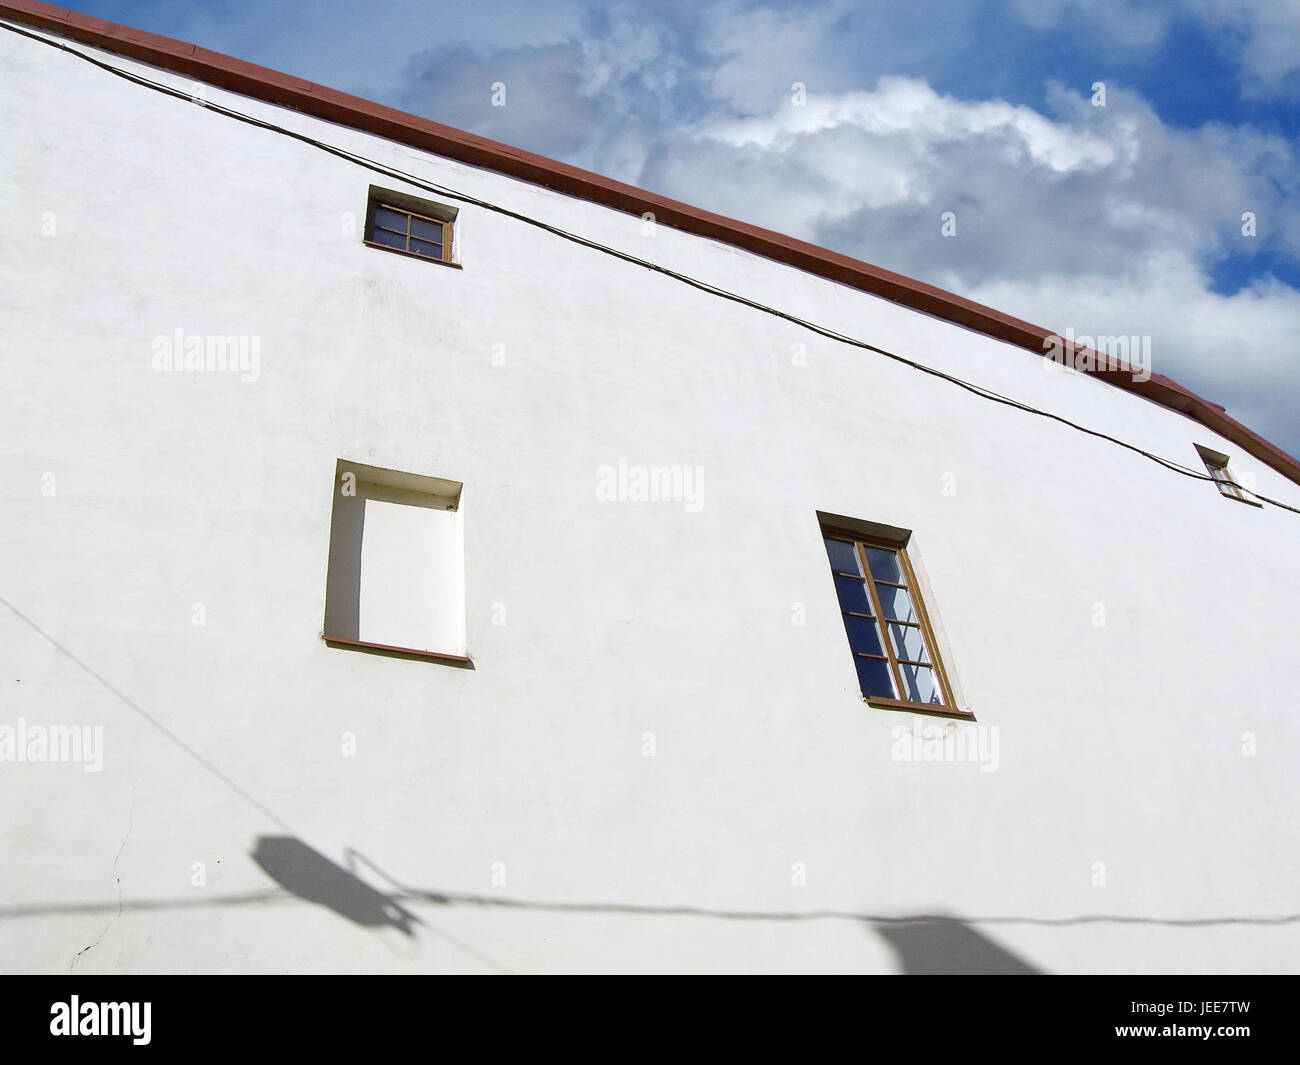 Lithuania, Vilnius, Old Town, Vilnius Jesuit high school, defensive wall, detail, the Baltic States, town, capital, part of town, building, structure, architecture, facade, school, high school, Jesuit's high school, window, shade, outside, deserted, cloudy sky, Stock Photo